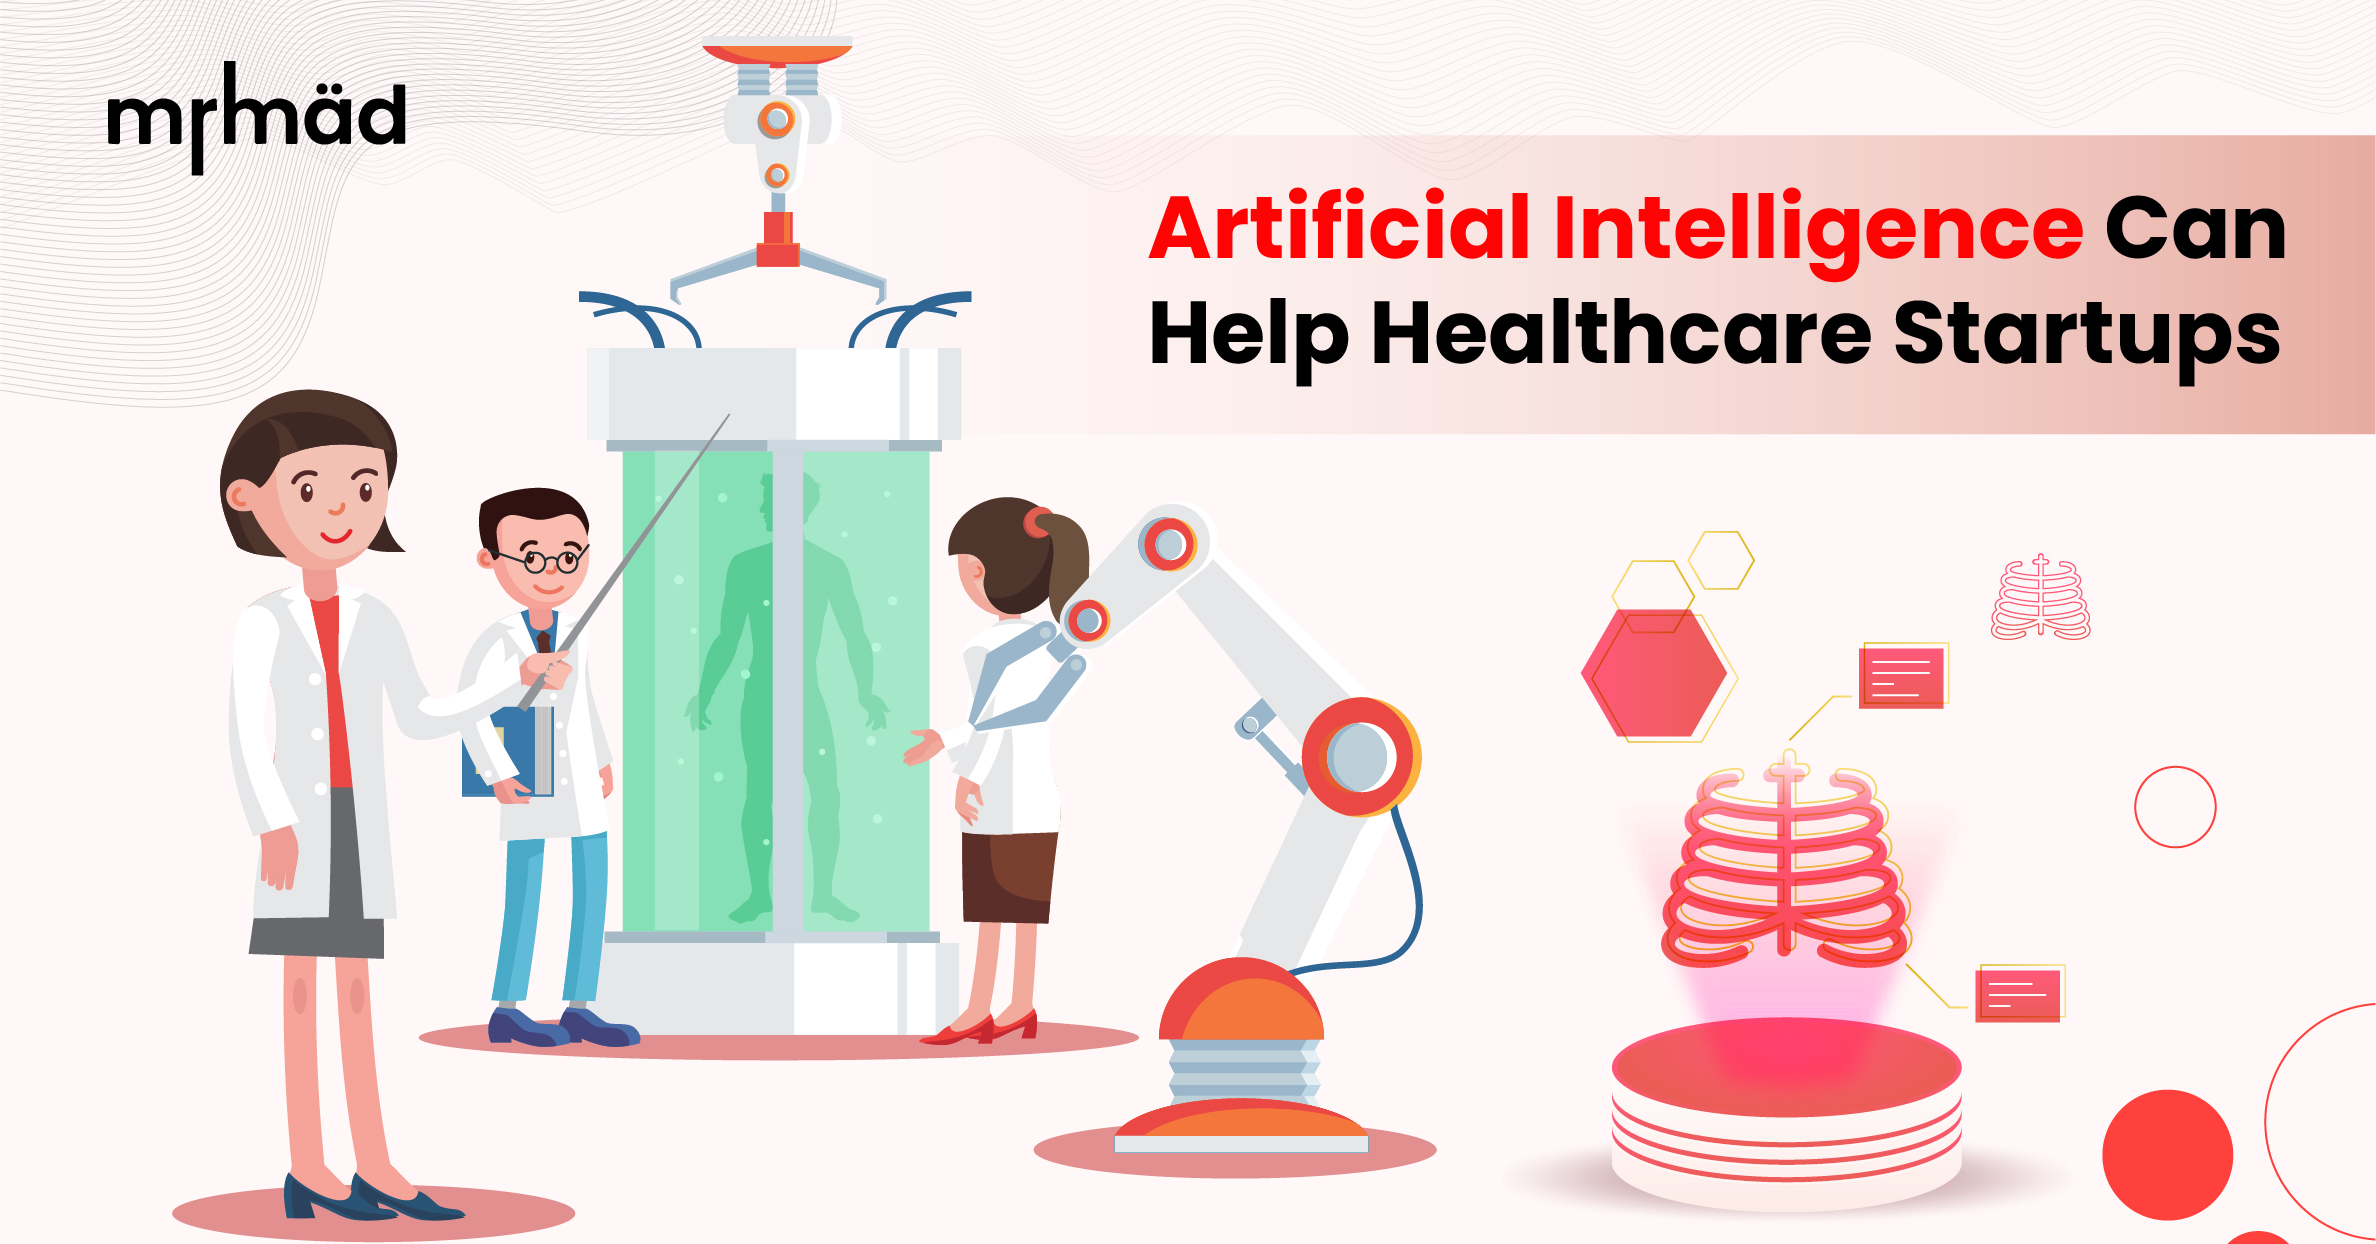 How Artificial Intelligence Can Help Healthcare Startups